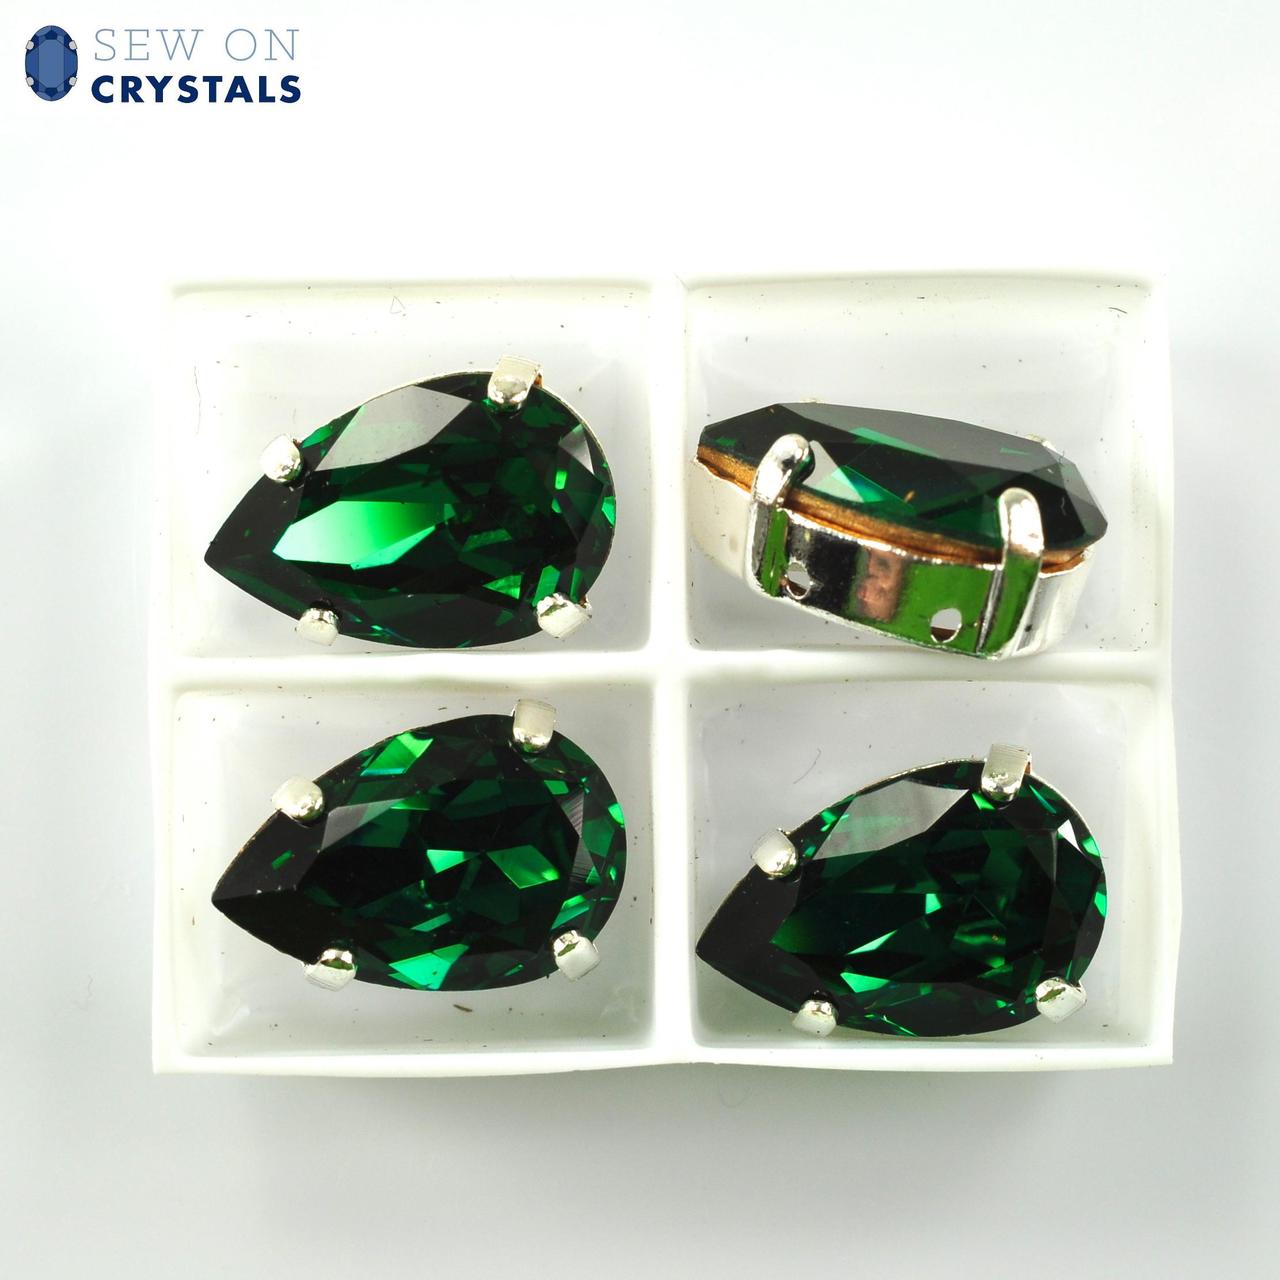 Emerald 13x8.5mm Pear Sew On Crystals - 4 Pieces